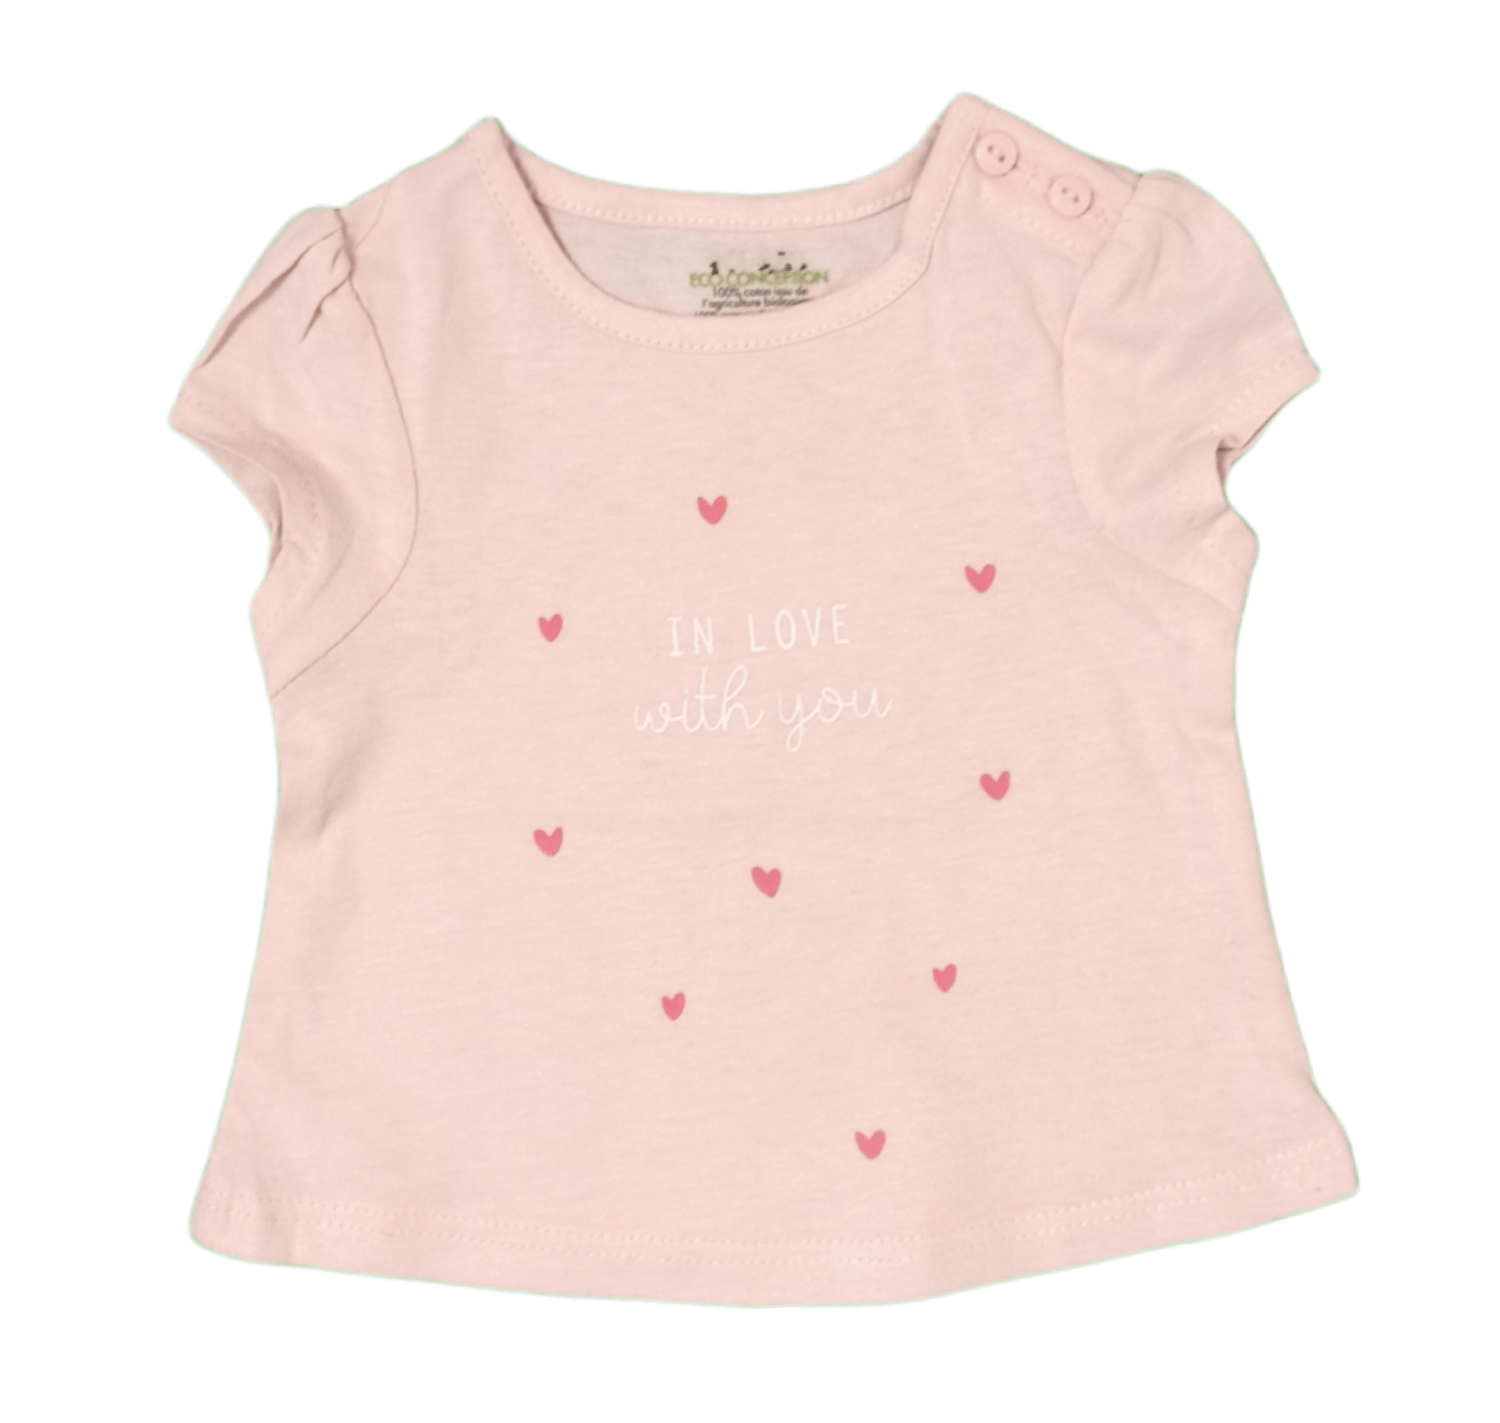 ElOutlet Baby Shirt Size 1m Baby Girl Shirt - Pink with Hearts - In Love with You